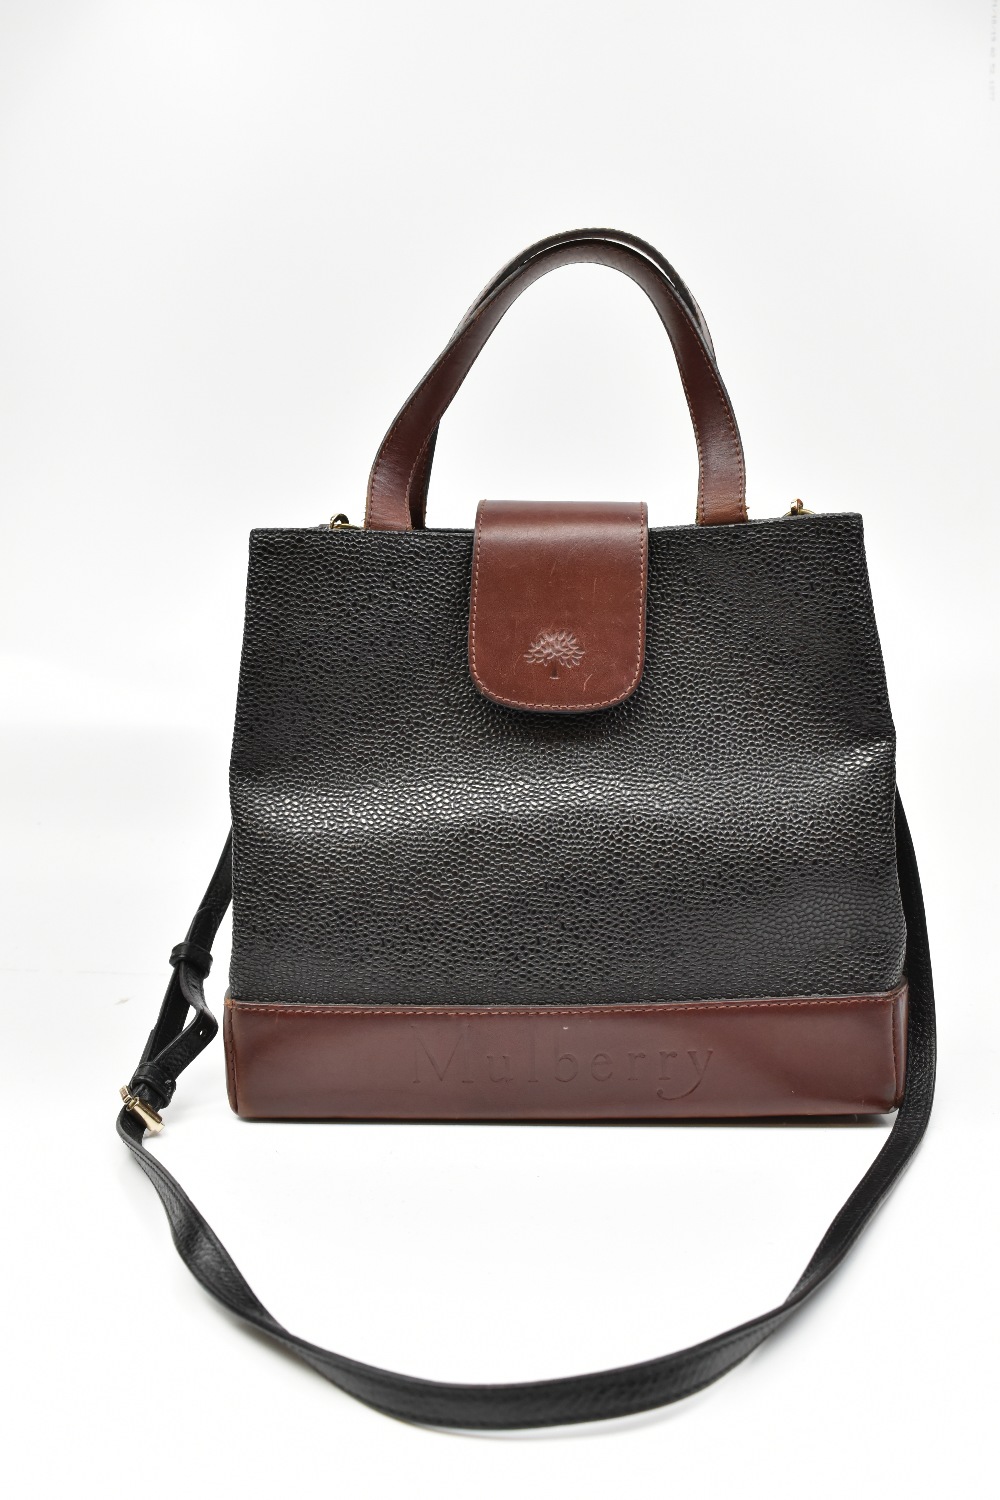 MULBERRY; a black and brown leather/Scotch grain handbag, with an adjustable cross body strap, and